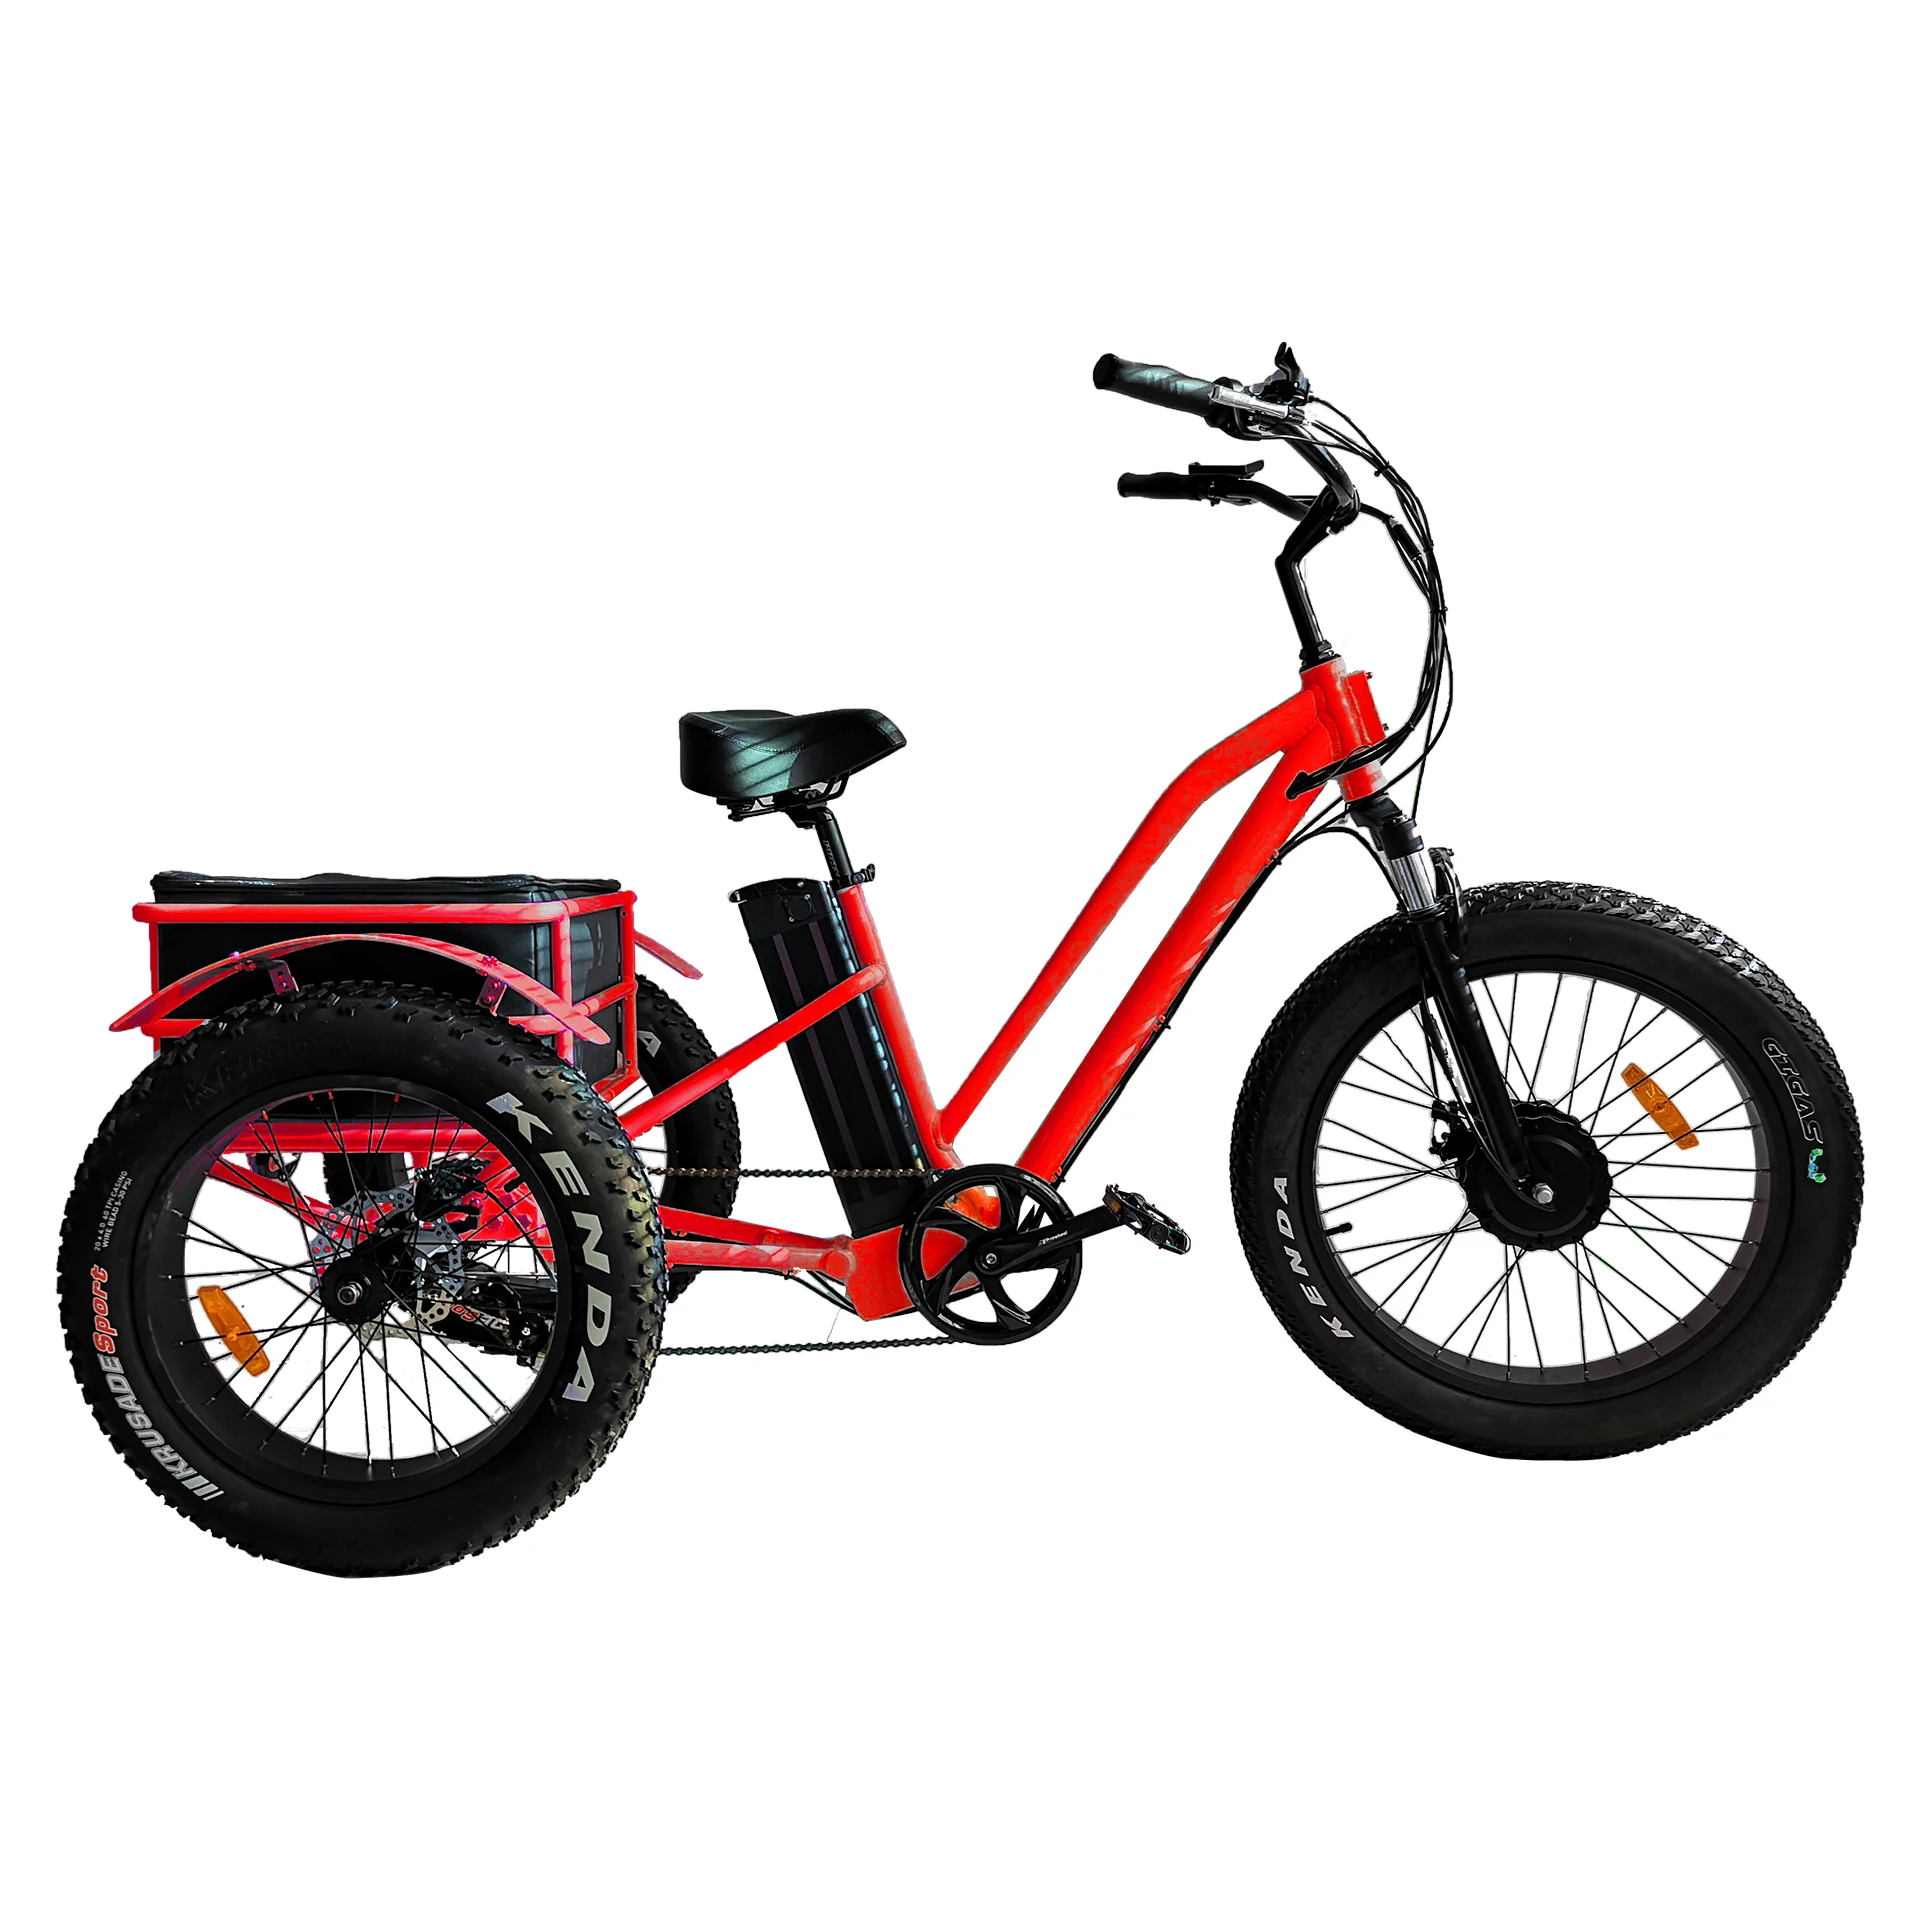 3 wheel electric bicycle